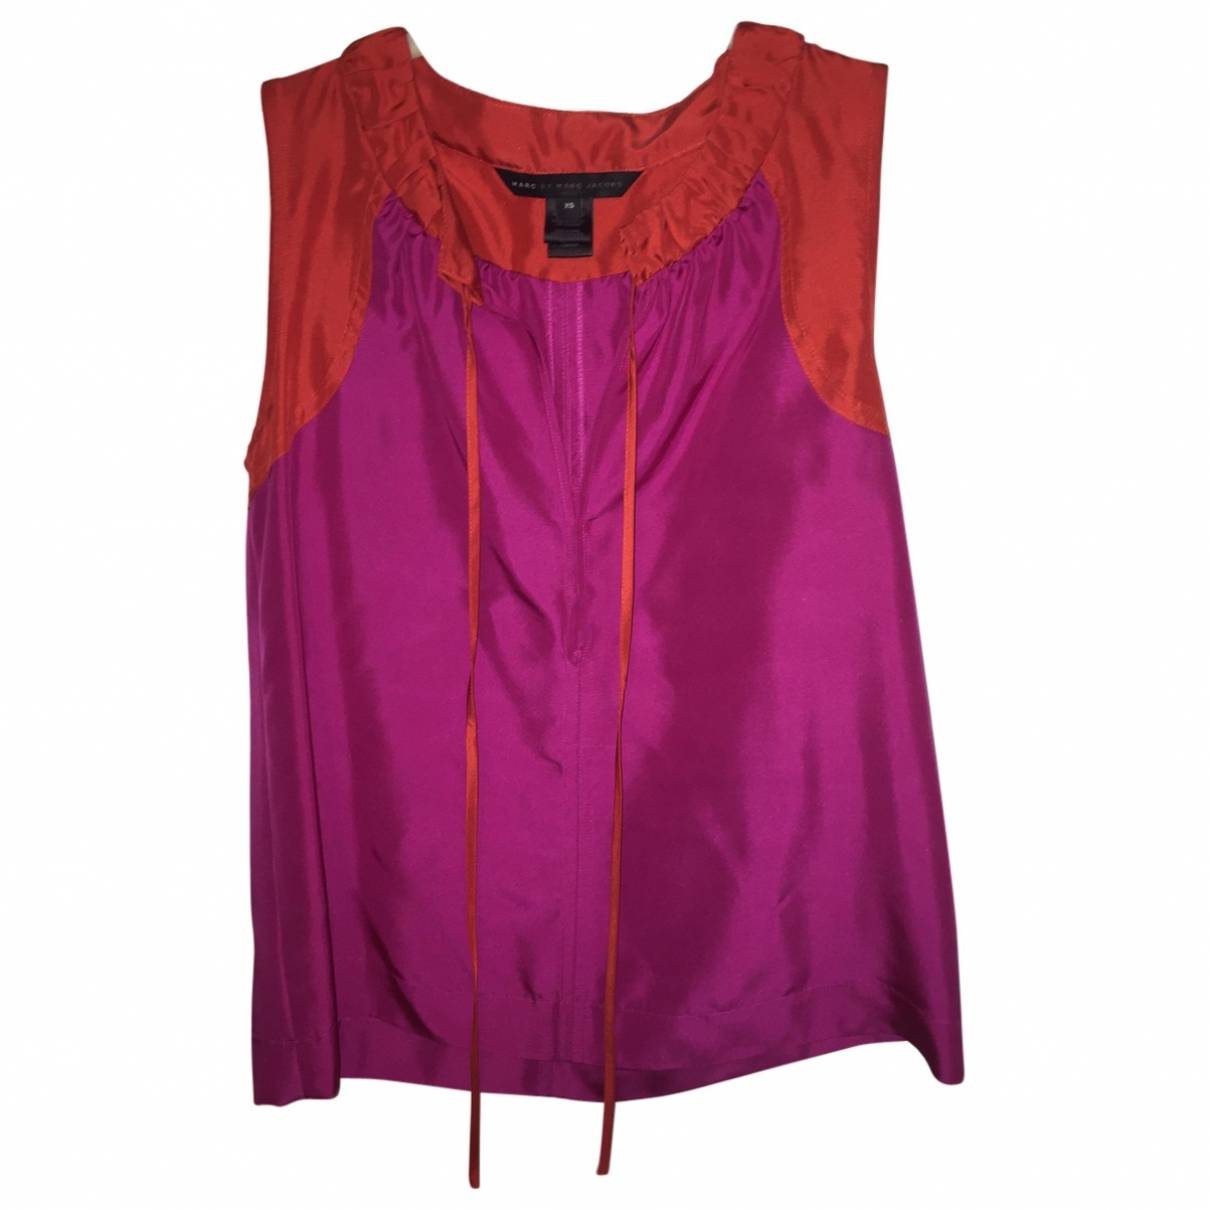 Silk blouse Marc by Marc Jacobs